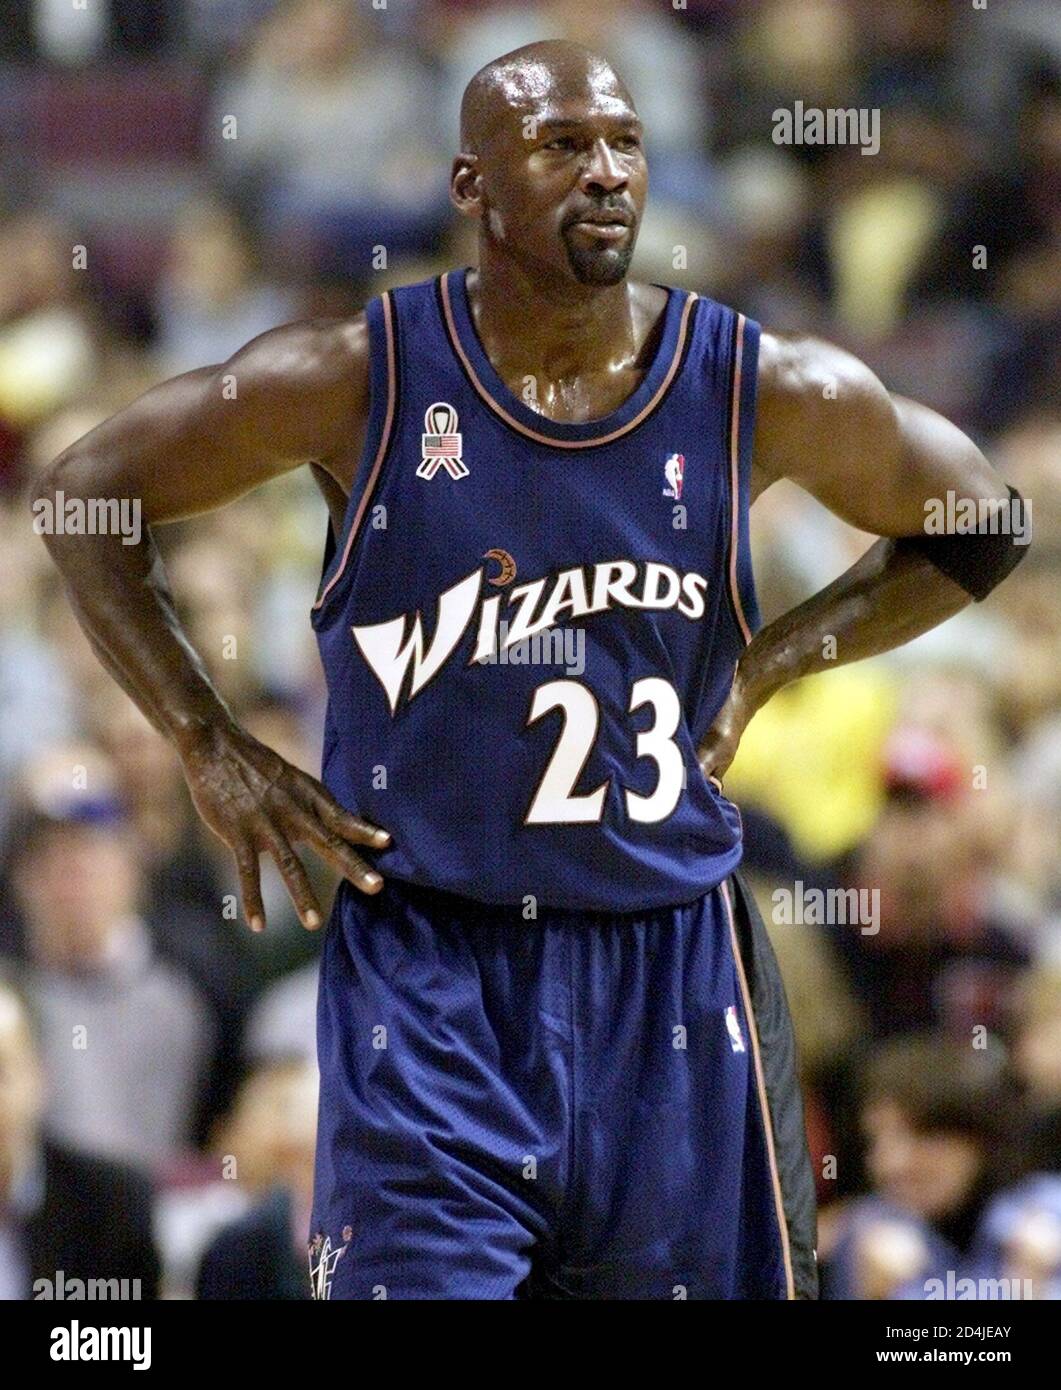 Washington Wizards guard Jordan reacts after a call against the Wizards during pre-season NBA action against the [Detroit Pistons in Auburn Hills] 11, 2001. This is Jordan's first game